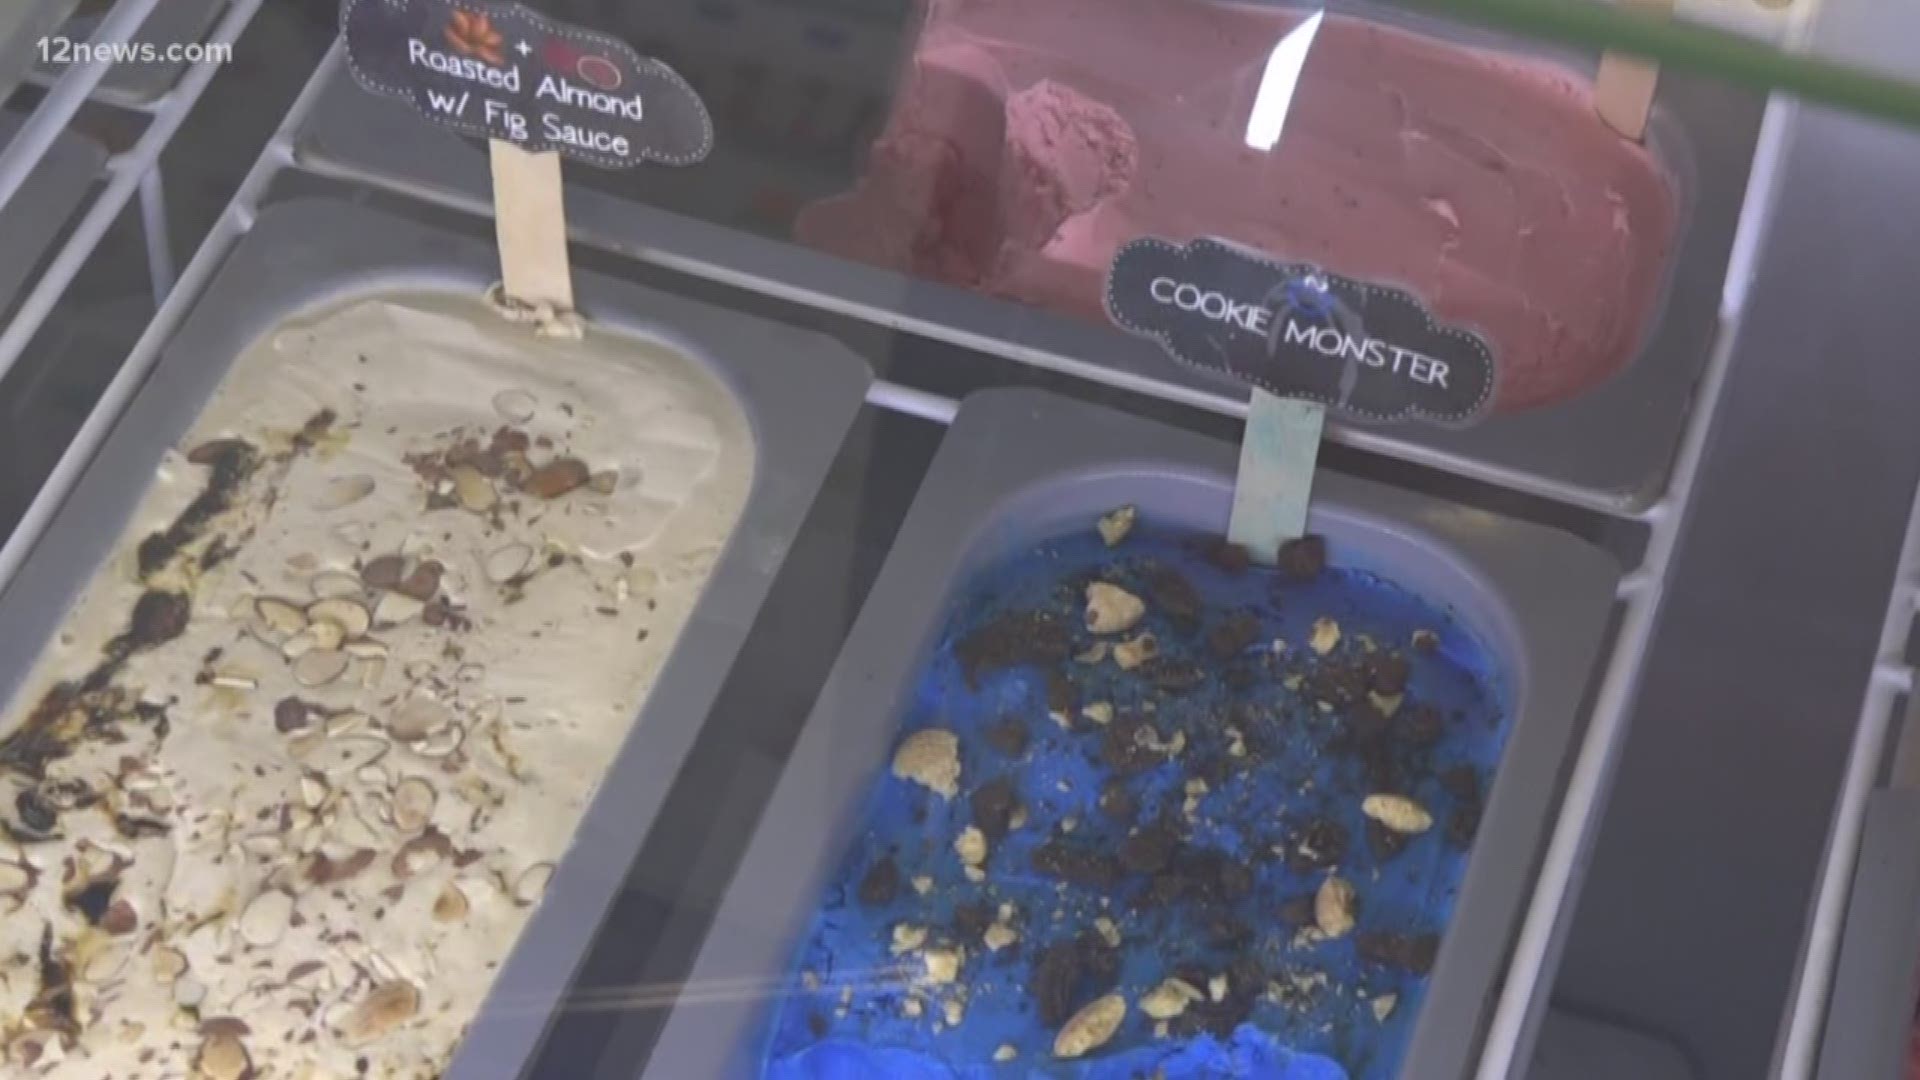 Yelp has released its list of top ice cream shops in the United States and Novel Ice Cream has come out on top. The shop at 11th and Grand Avenues has been open since March 2017 and has gained attention for unique flavor combinations.